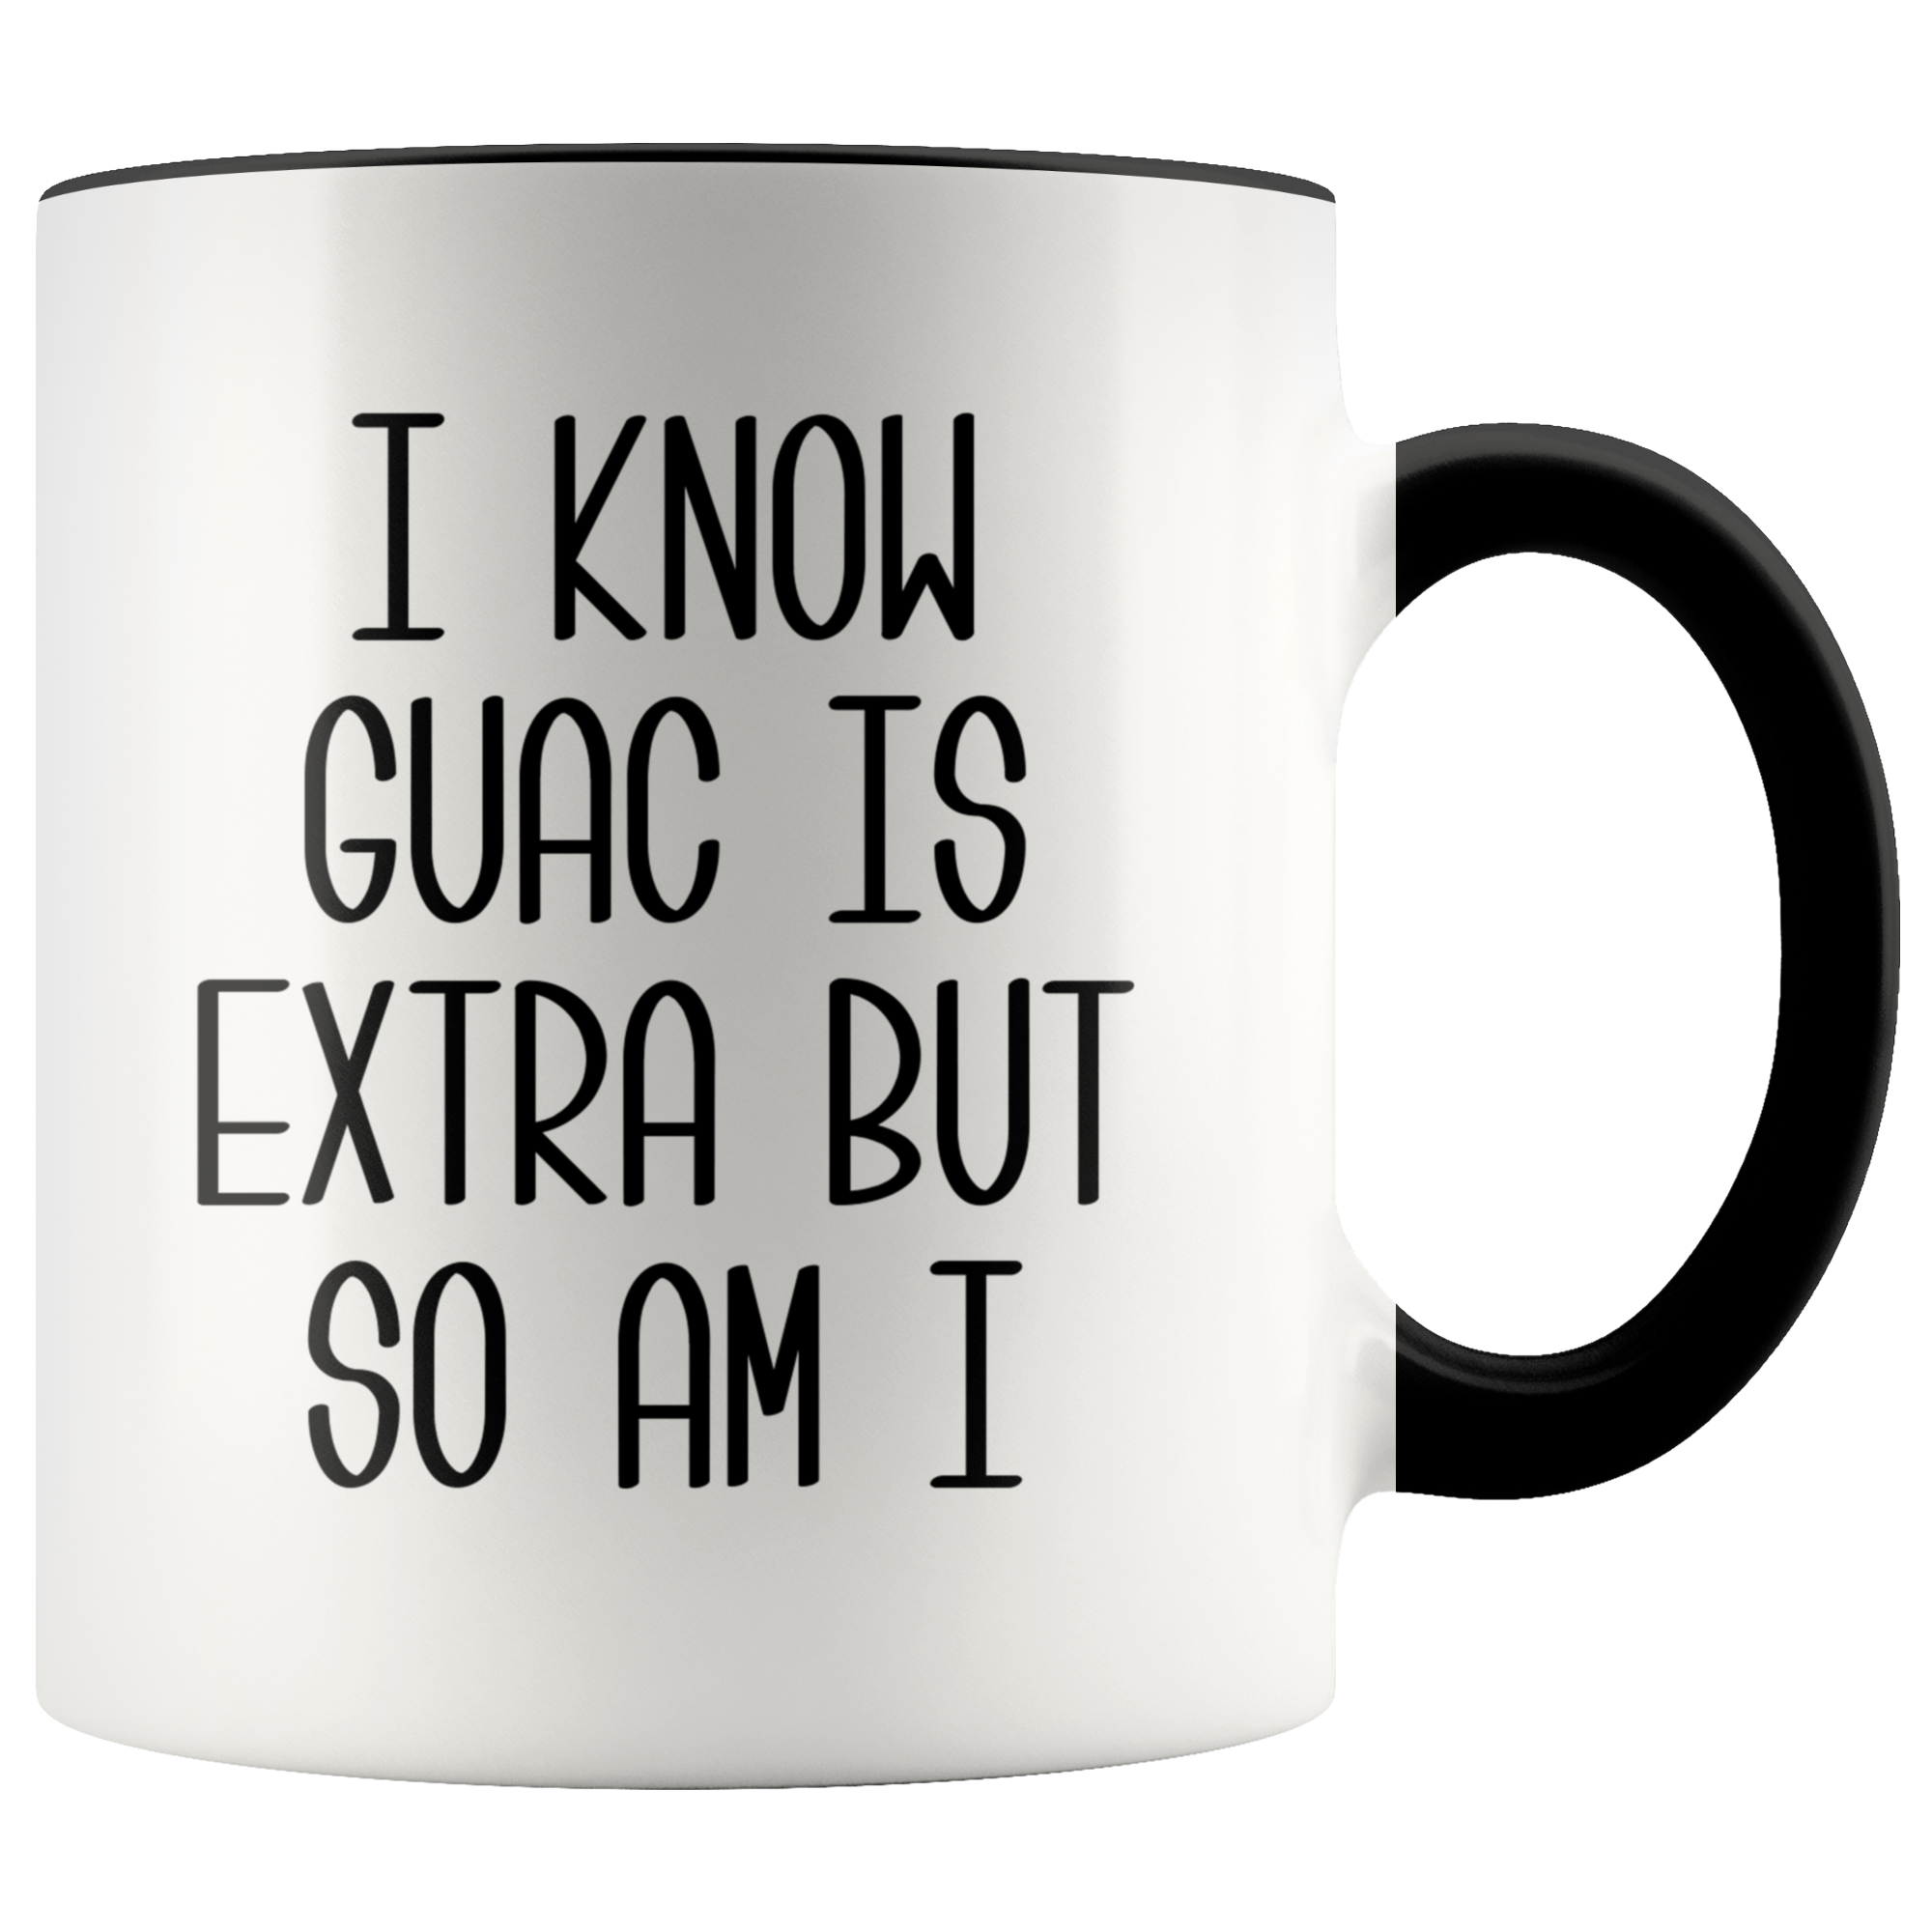 Avocado Mug Avocado Gifts Mugs with Sayings I Know Guac Is Extra AF Mug Funny Coffee Cup Guacamole Mugs with Quotes Funny Gifts for Friends